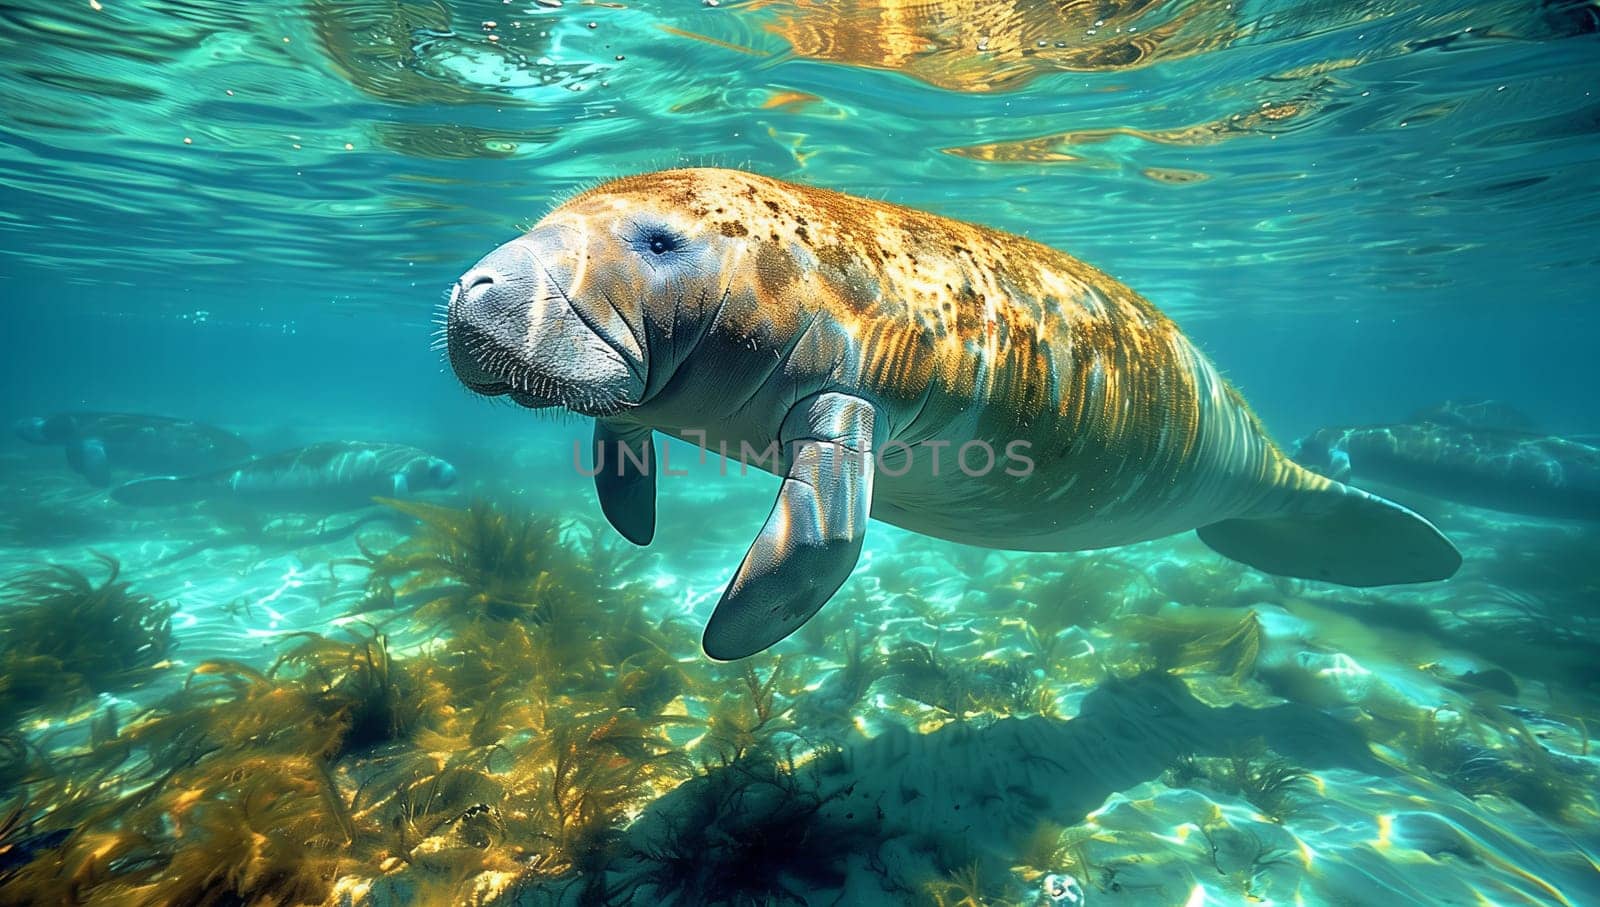 A manatee gracefully glides through the water near a coral reef by richwolf